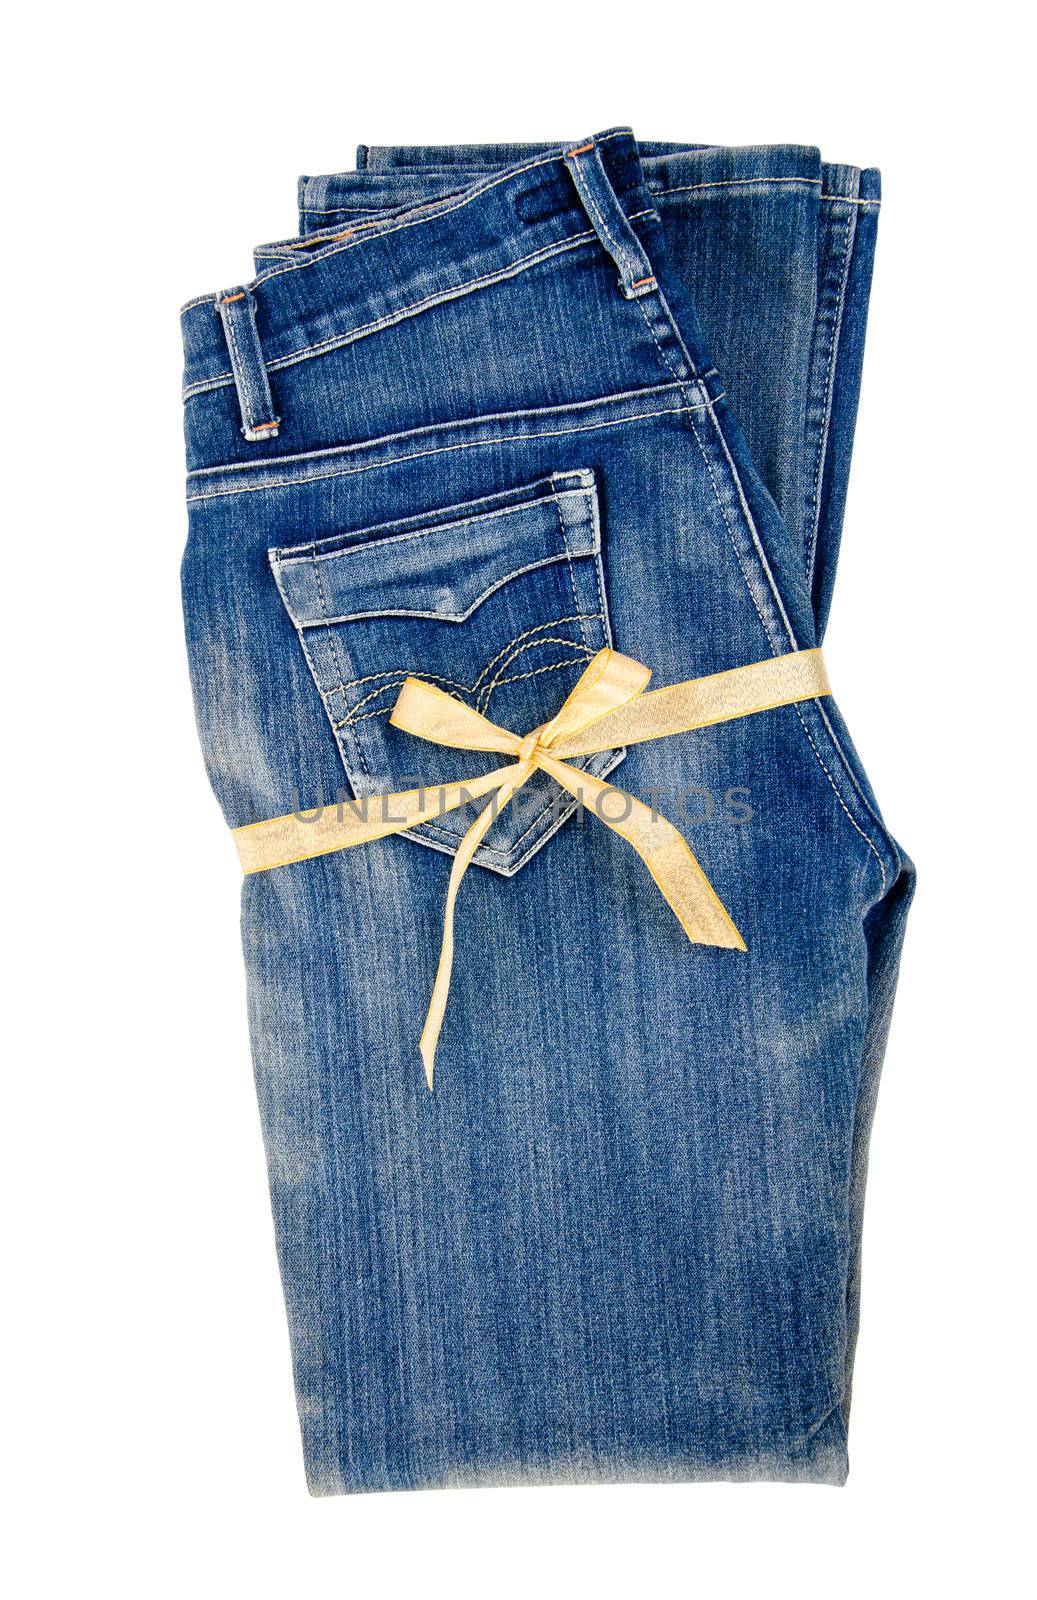 blue jeans and gold ribbon isolated on white background. Gift concept.